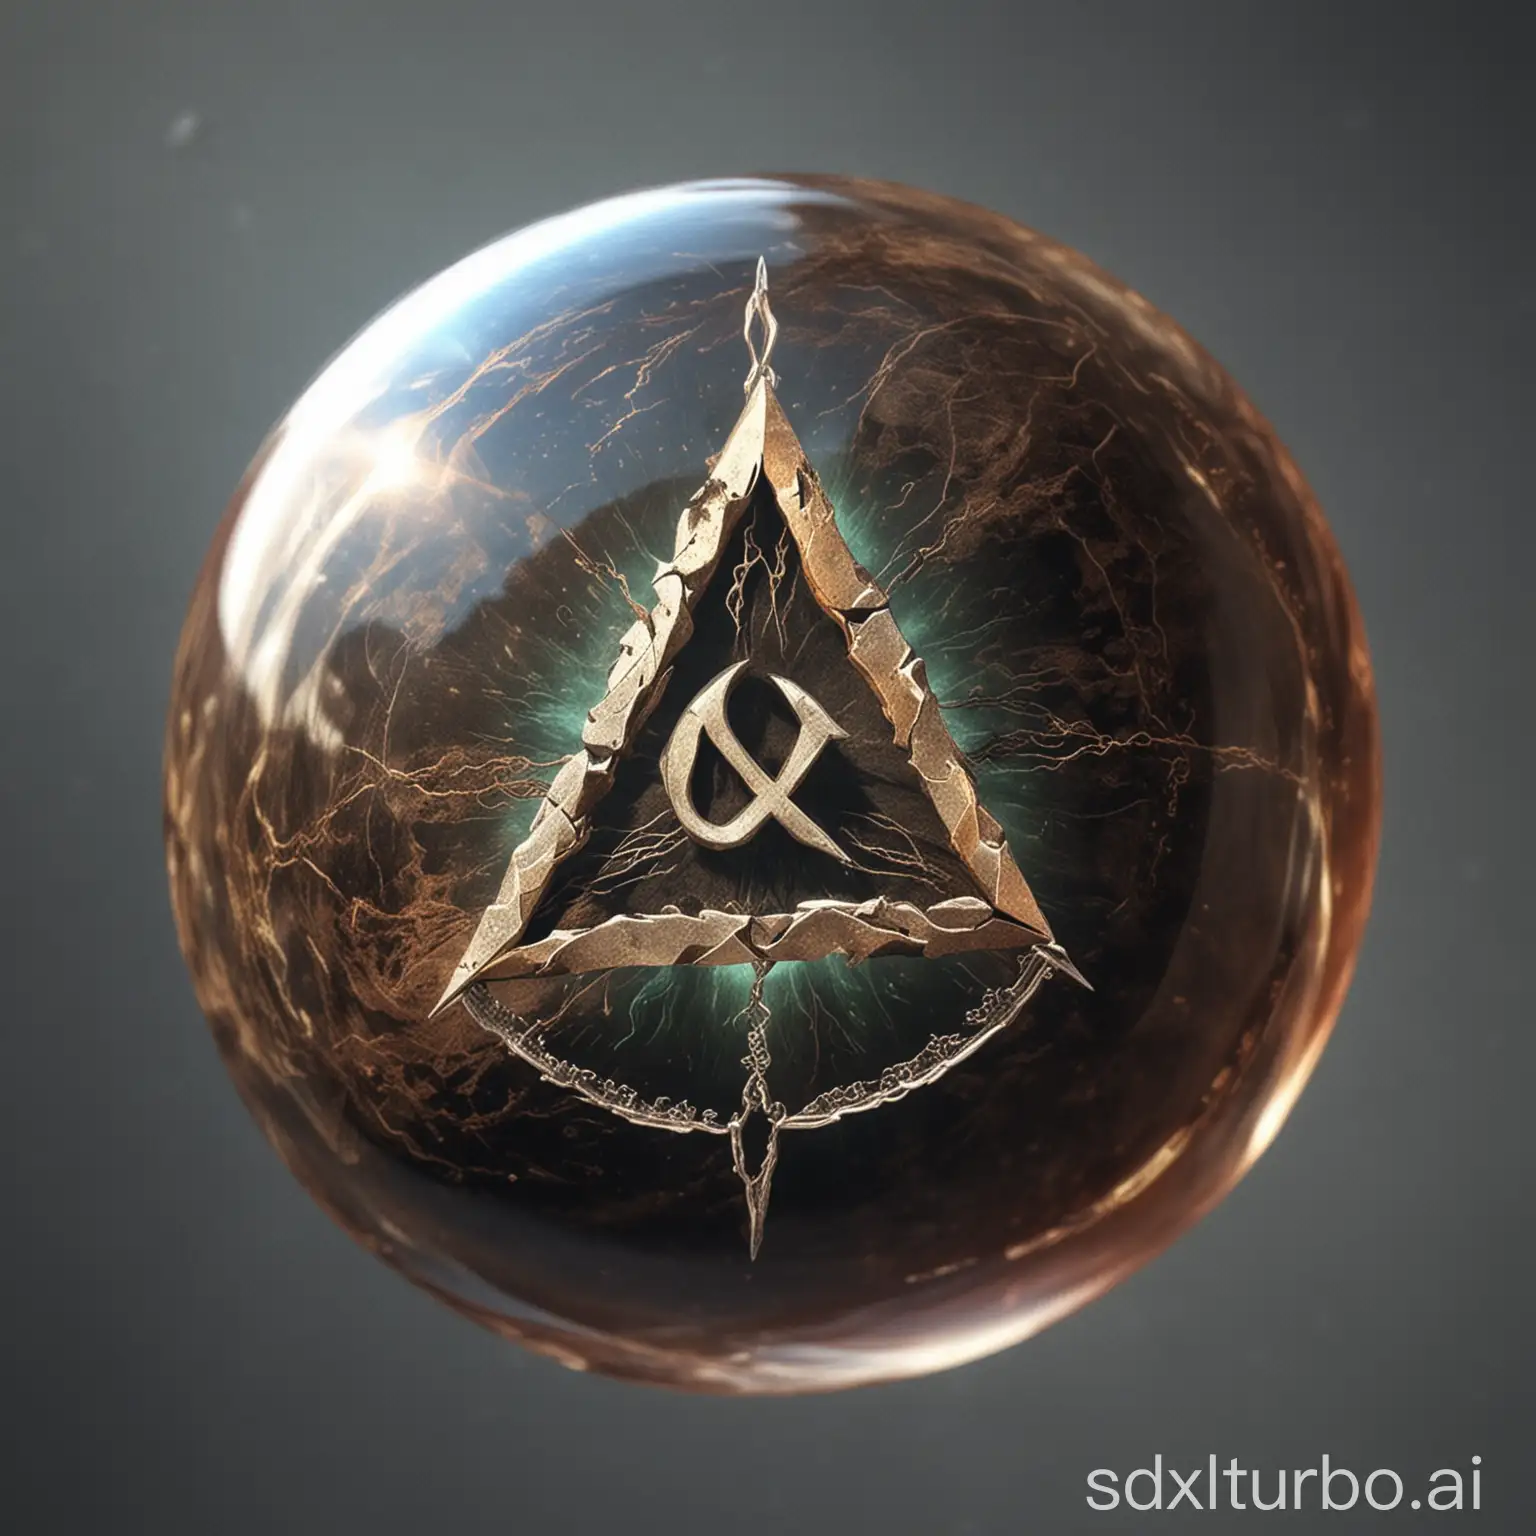 A small circular orb of energy representing a rune of earth